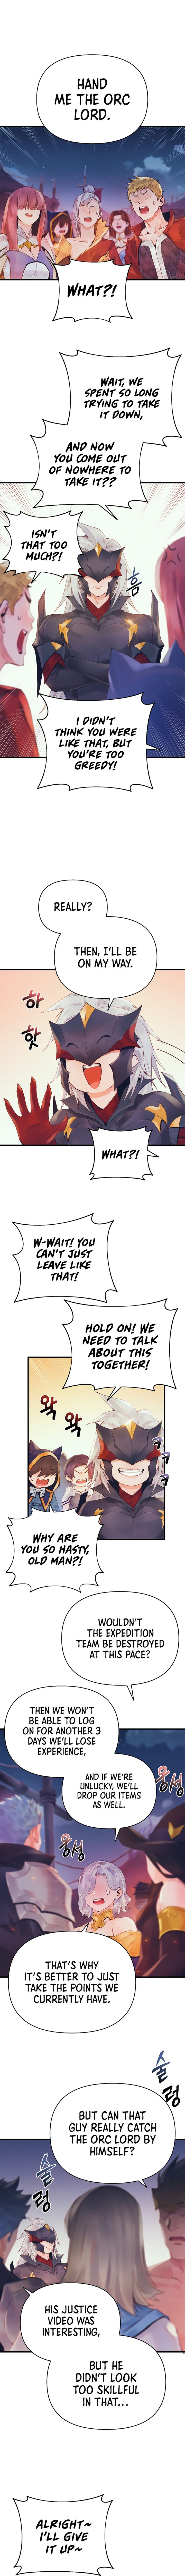 the-healing-priest-of-the-sun-chap-33-1